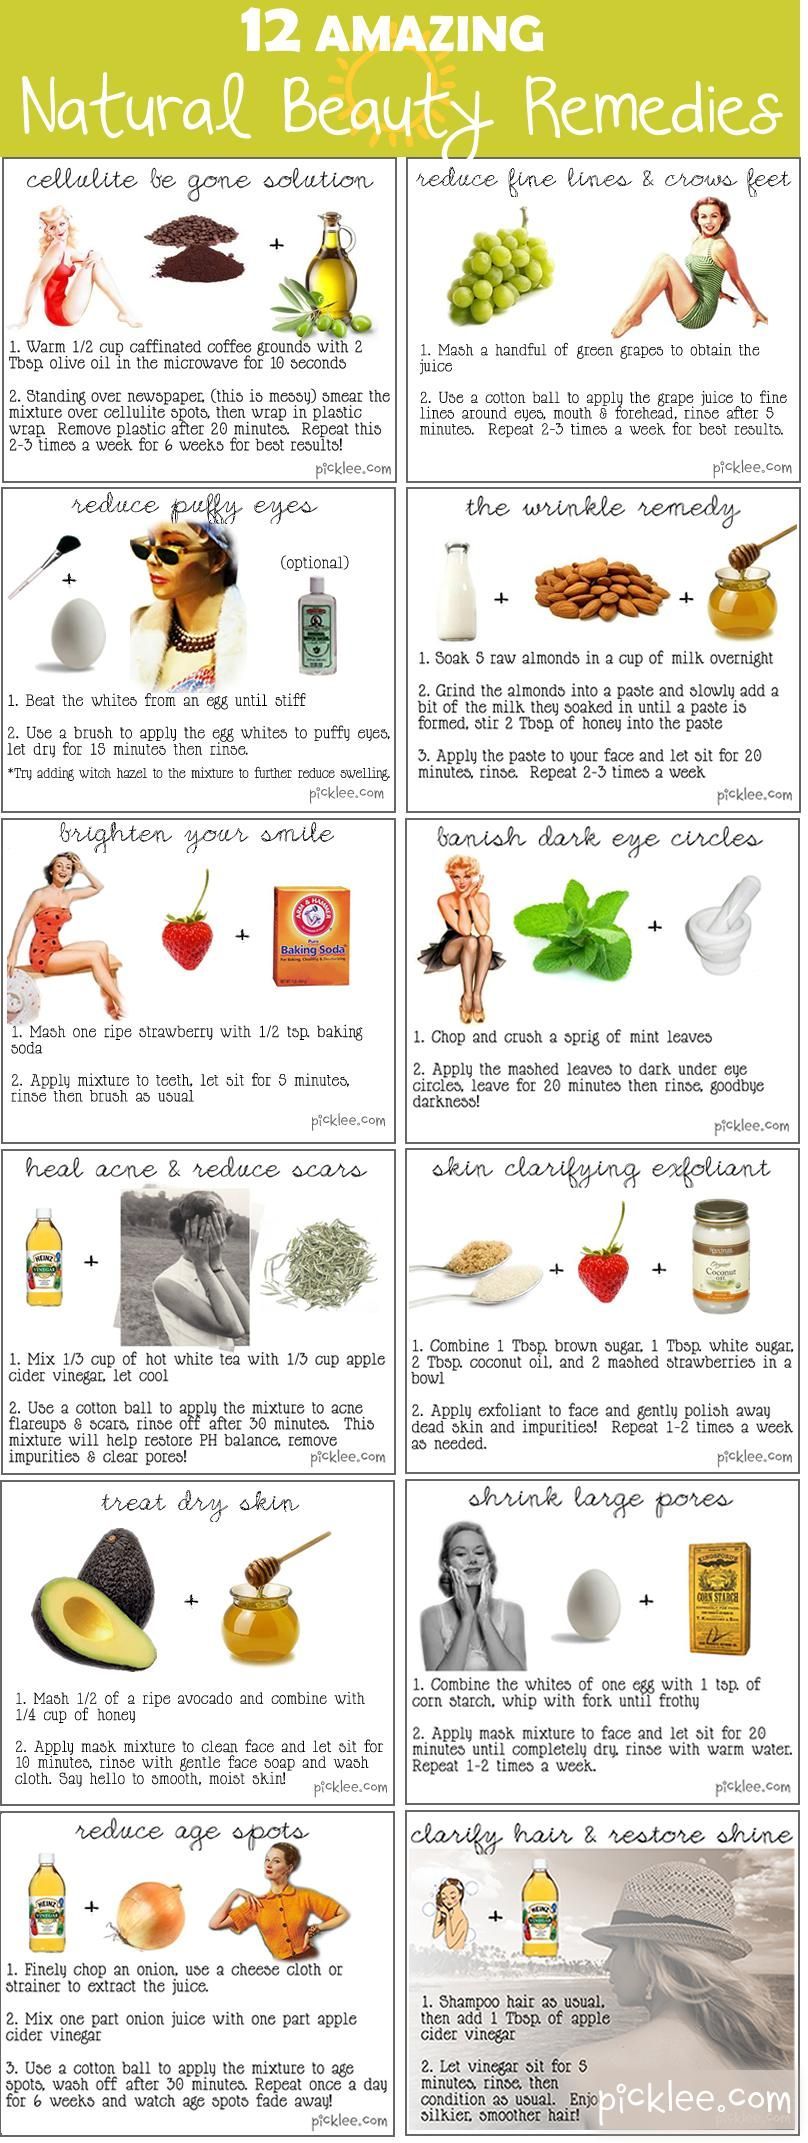 Skin care tips and ideas : 12 Astonishing Natural Beauty Remedies {DIY Inspirati